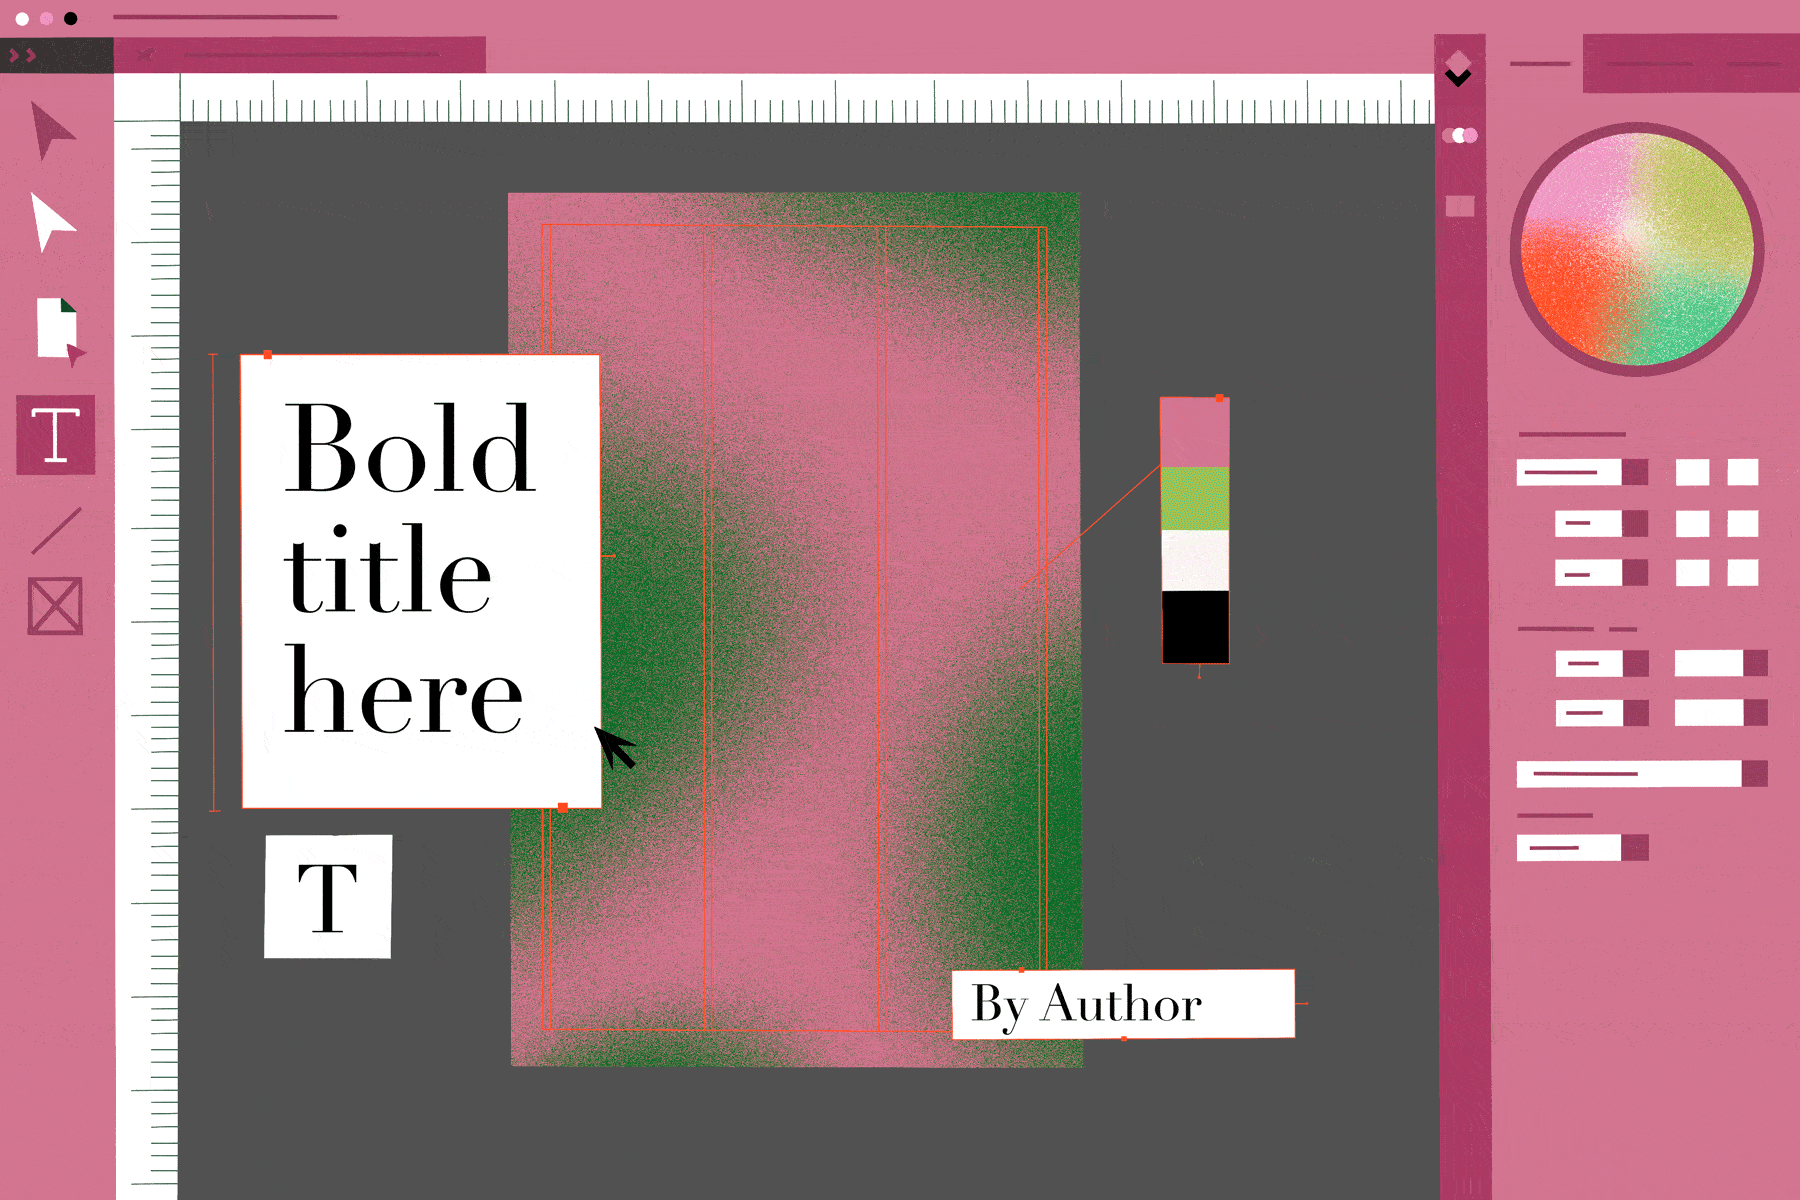 An illustration of image-editing software piecing together a cover made of pink and green shapes with bold text